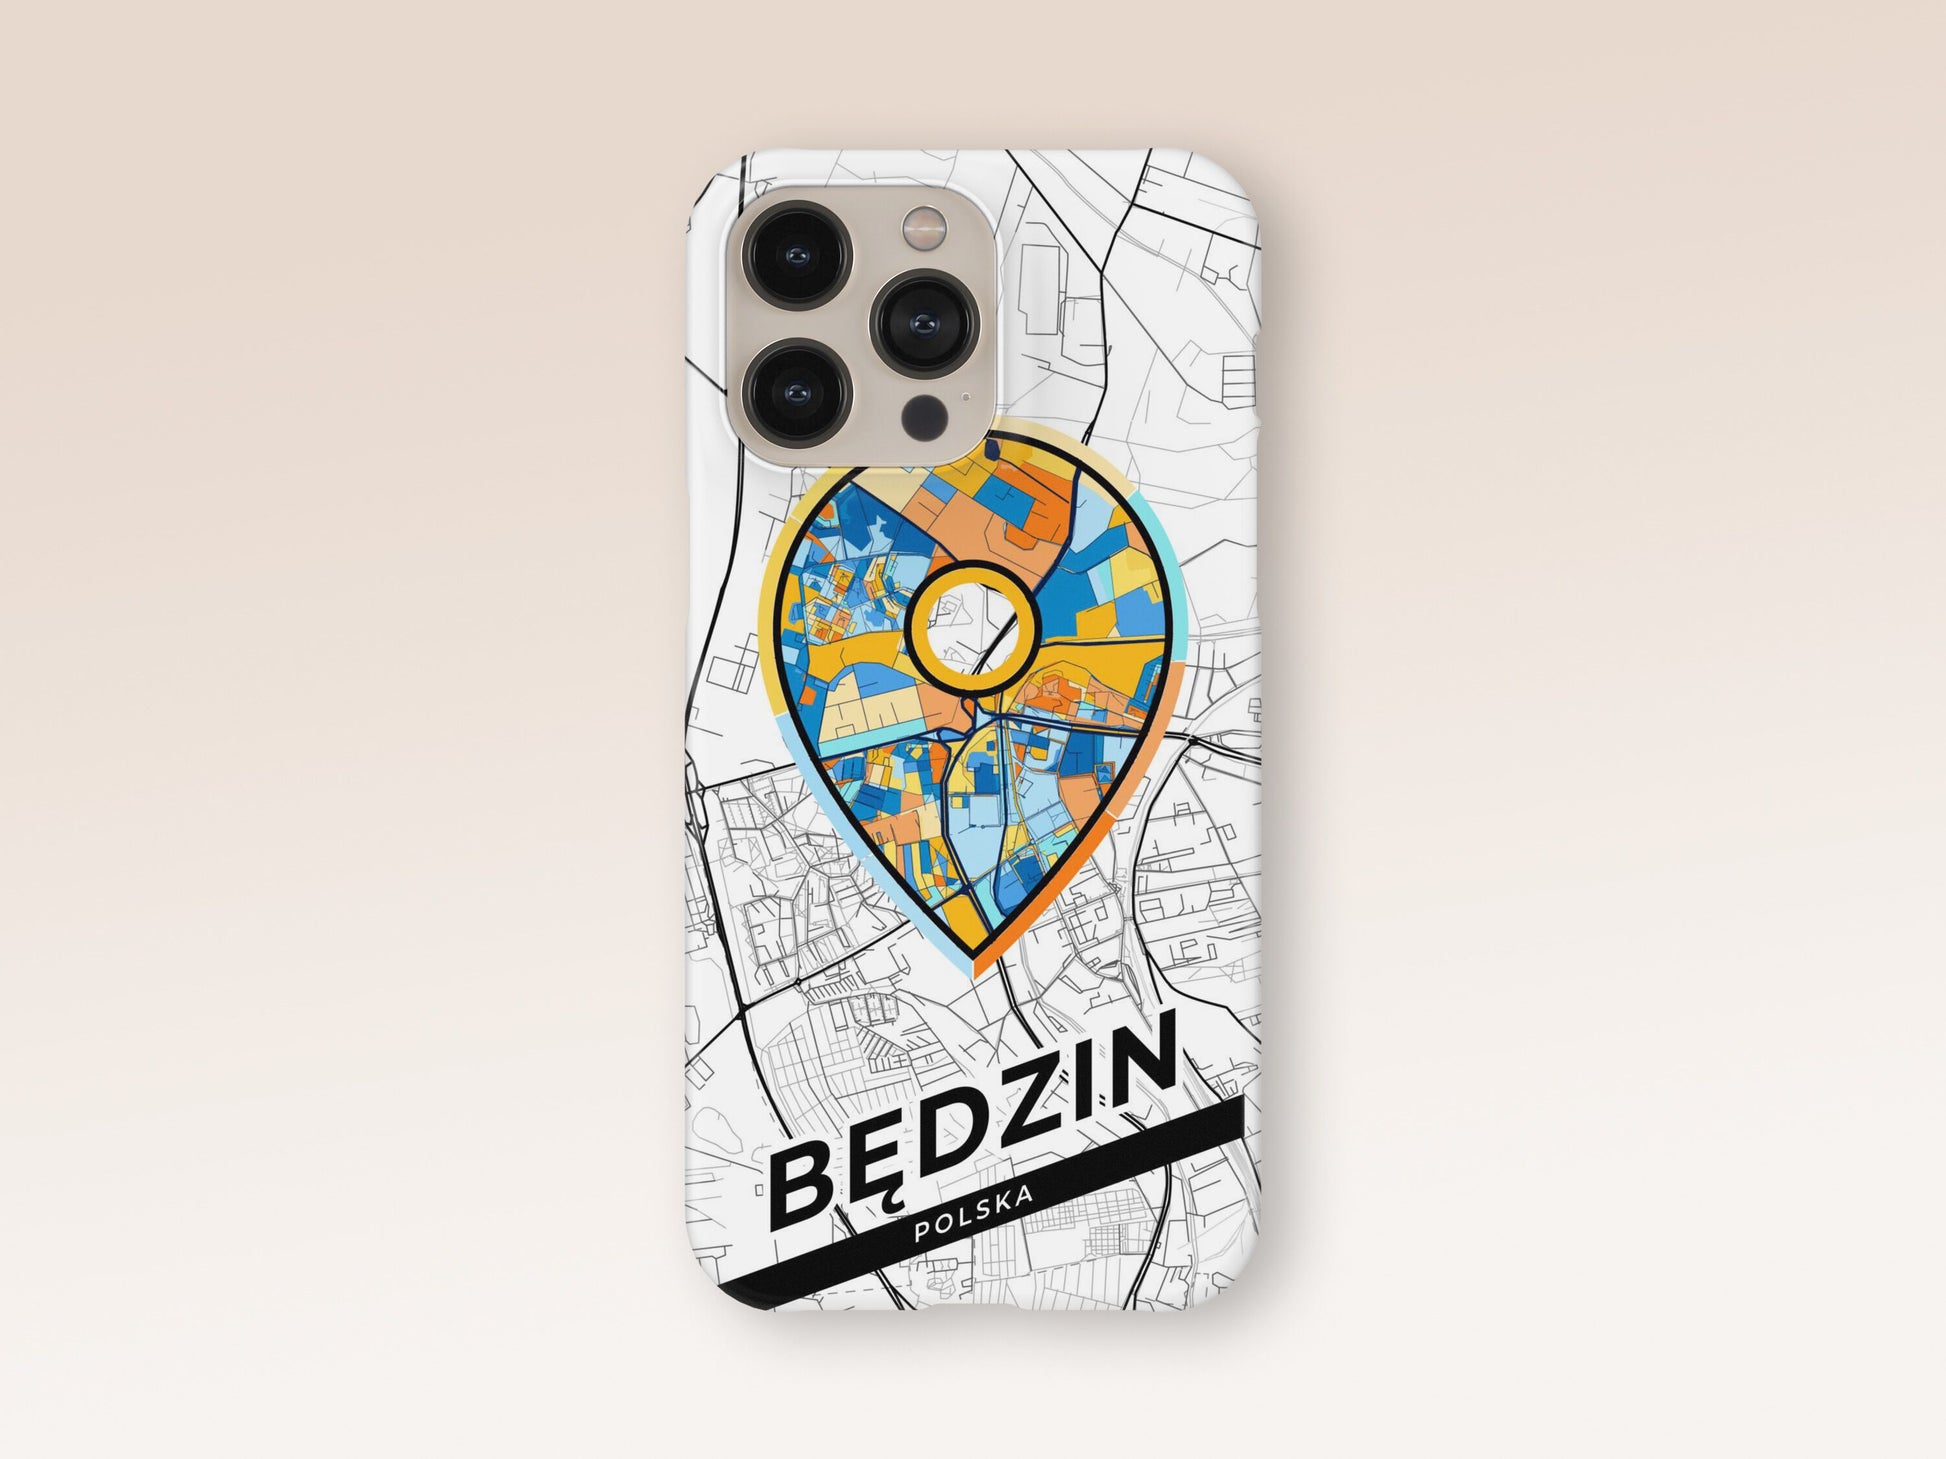 Będzin Poland slim phone case with colorful icon. Birthday, wedding or housewarming gift. Couple match cases. 1